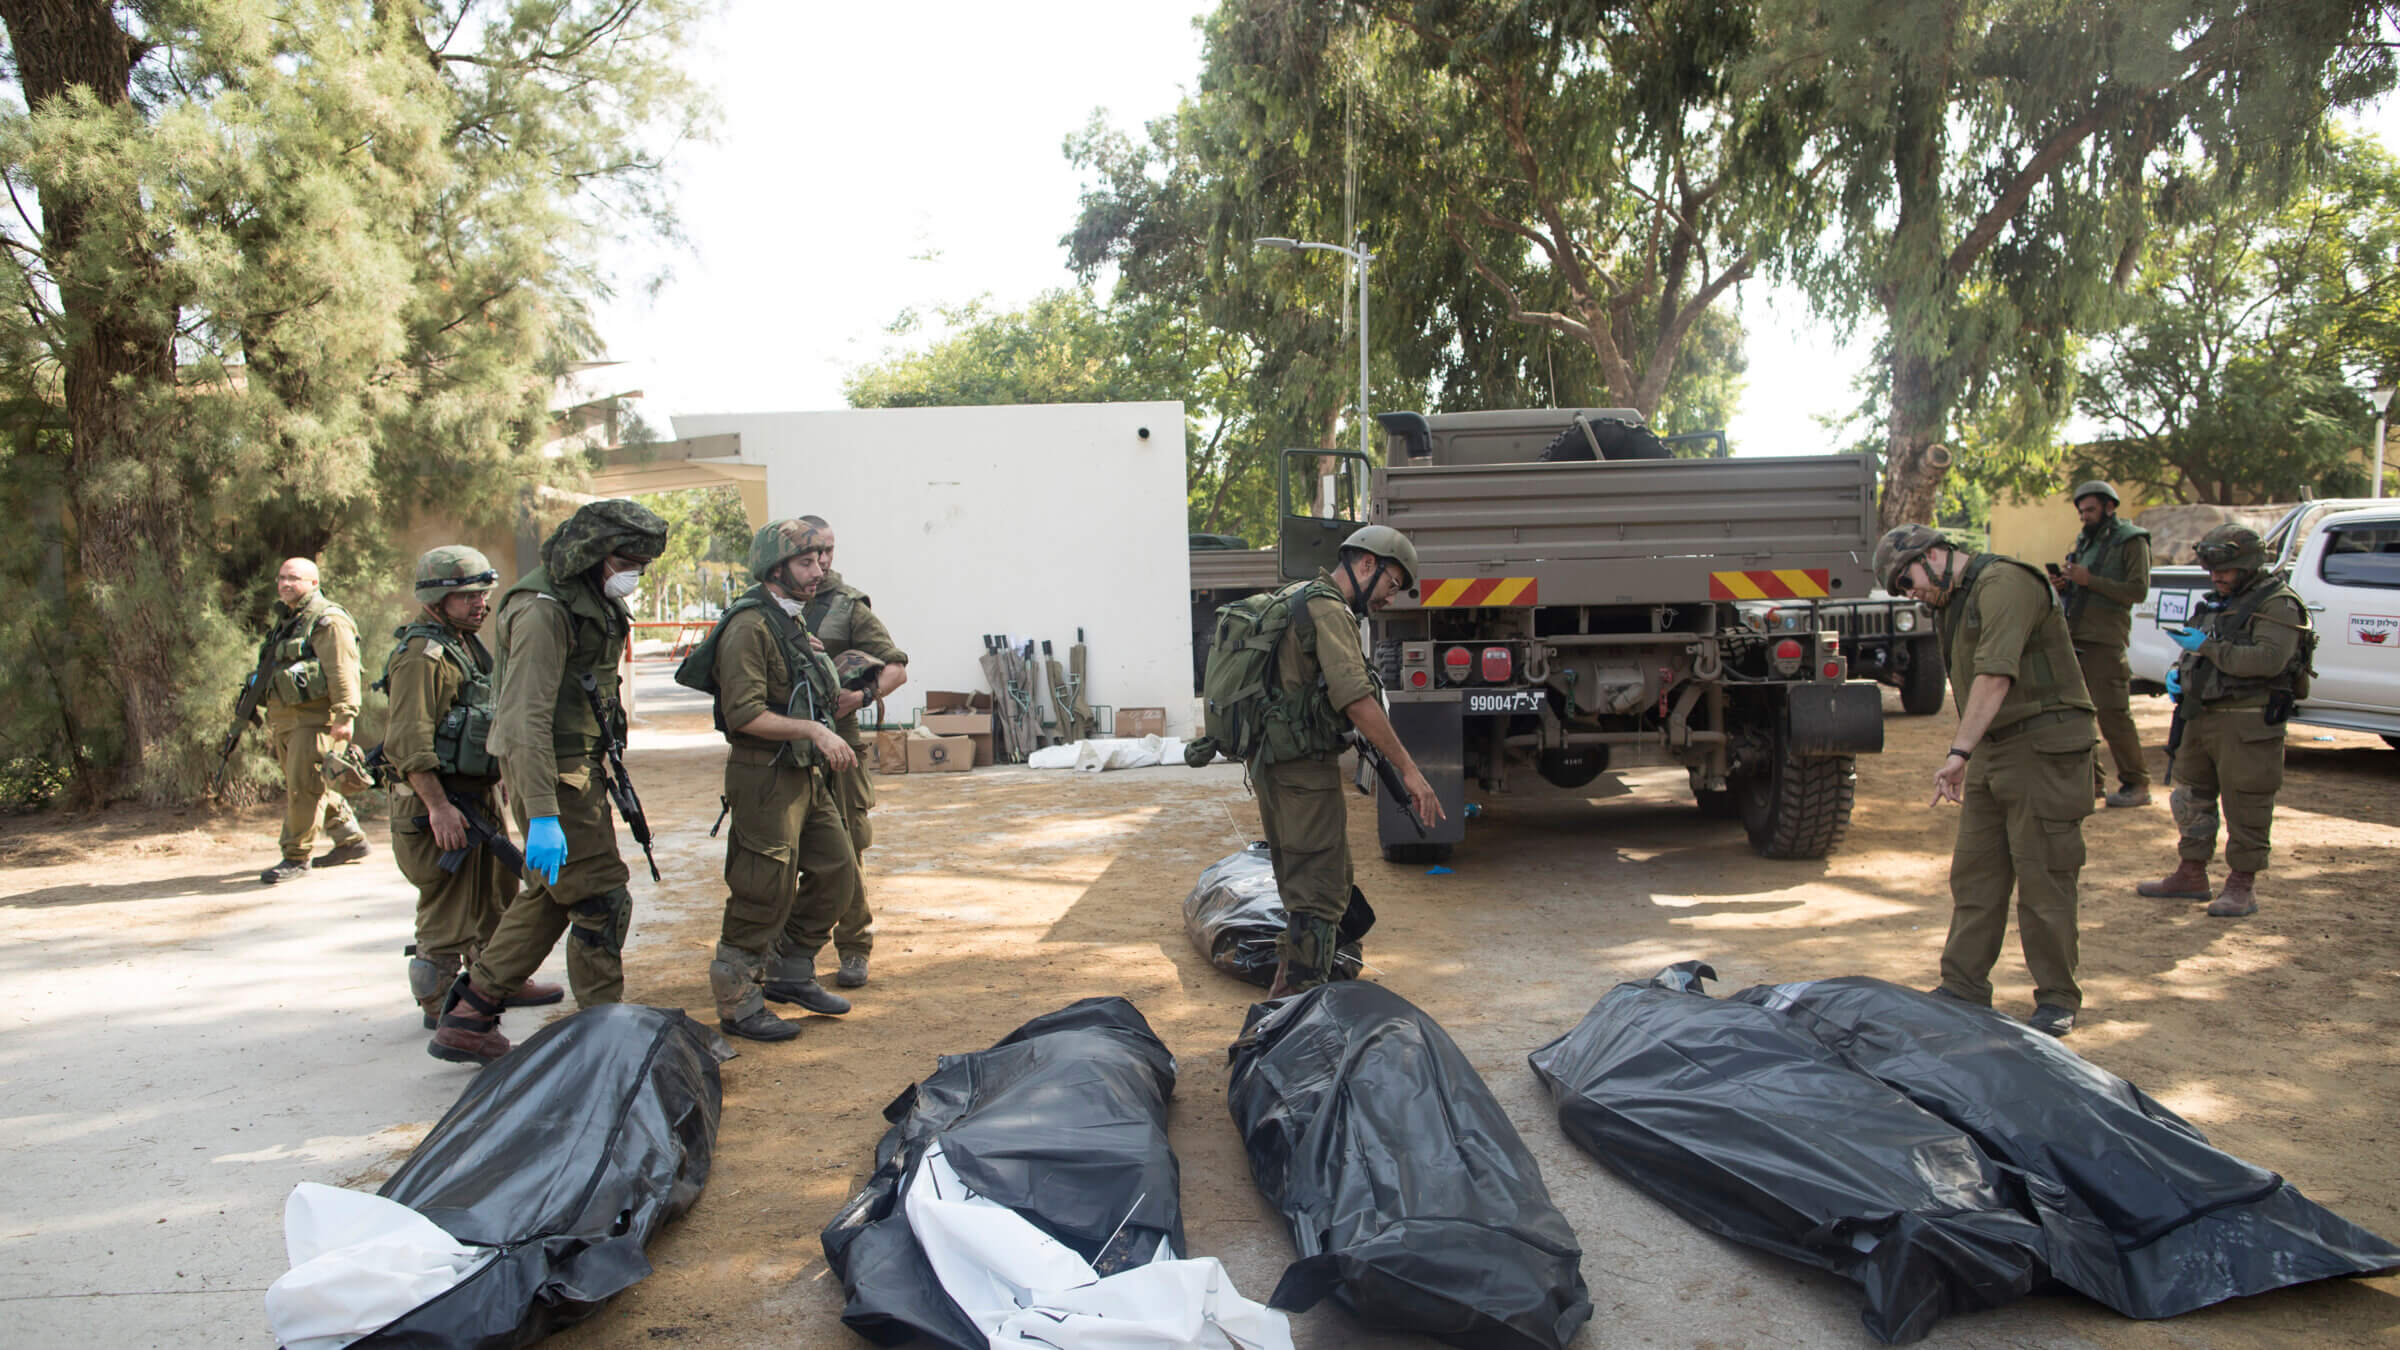 Israeli soldiers remove the bodies of civilians, who were killed days earlier in an attack by Palestinian militants on this kibbutz near the border with Gaza on Tuesday.